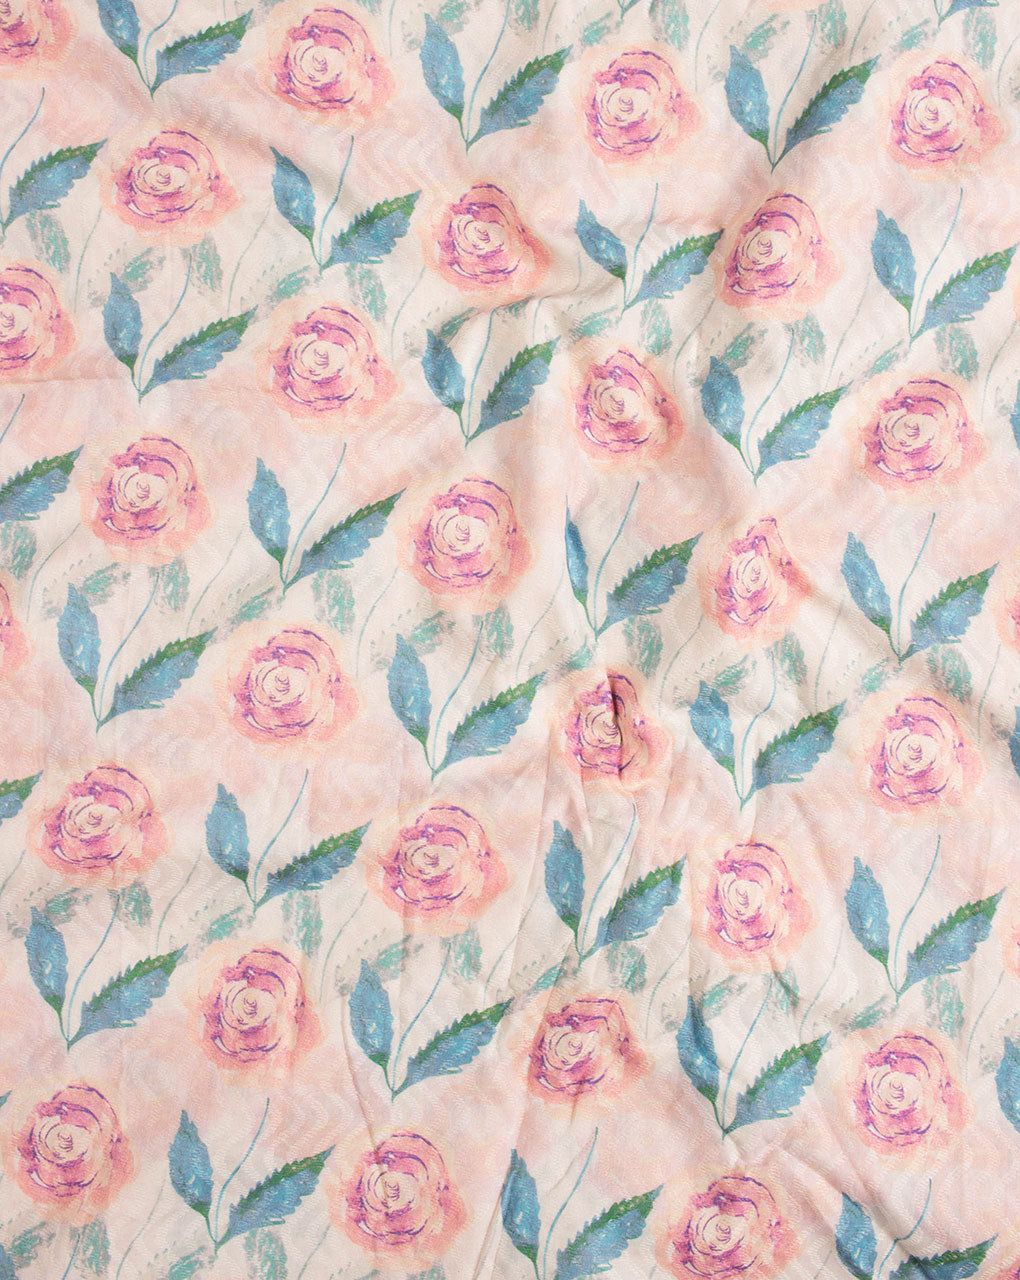 Off-White Pink Floral Digital Print Dobby Cotton Fabric - Fabriclore.com